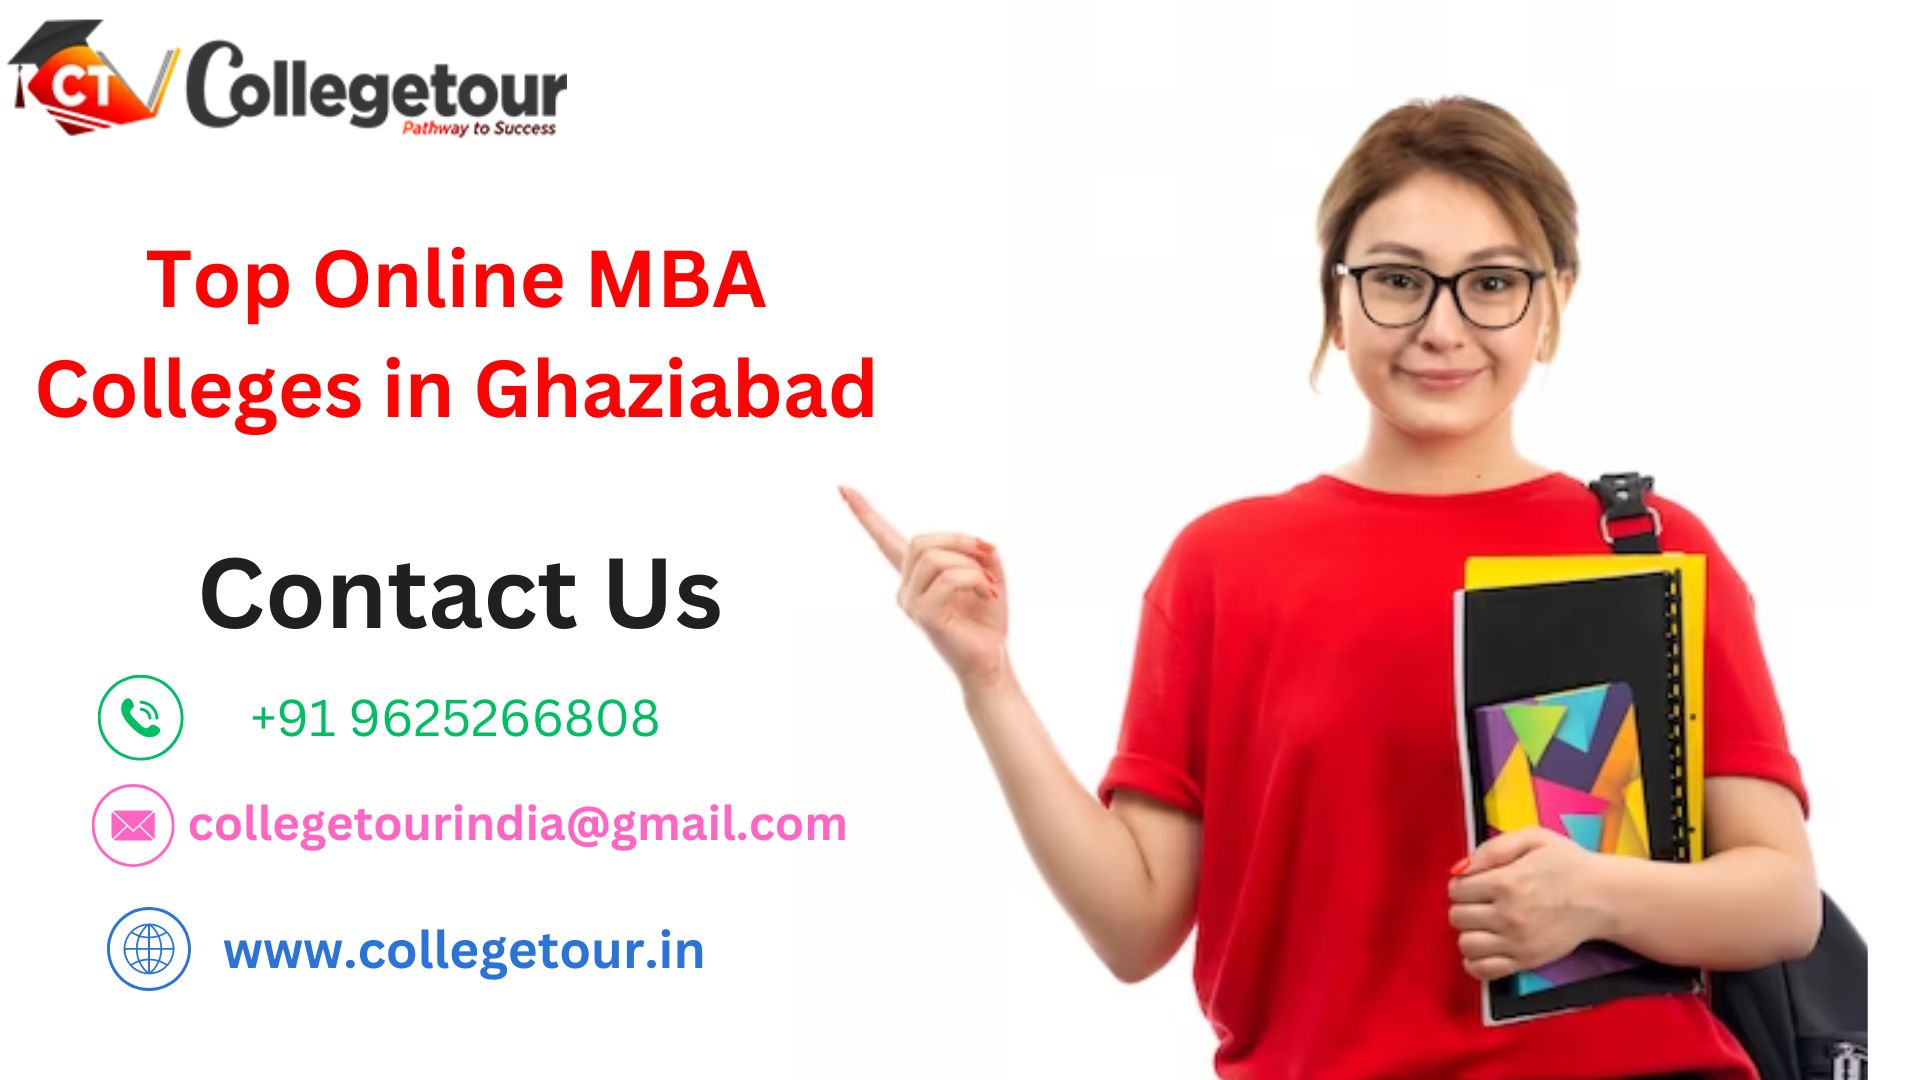 Top Online MBA Colleges in Ghaziabad